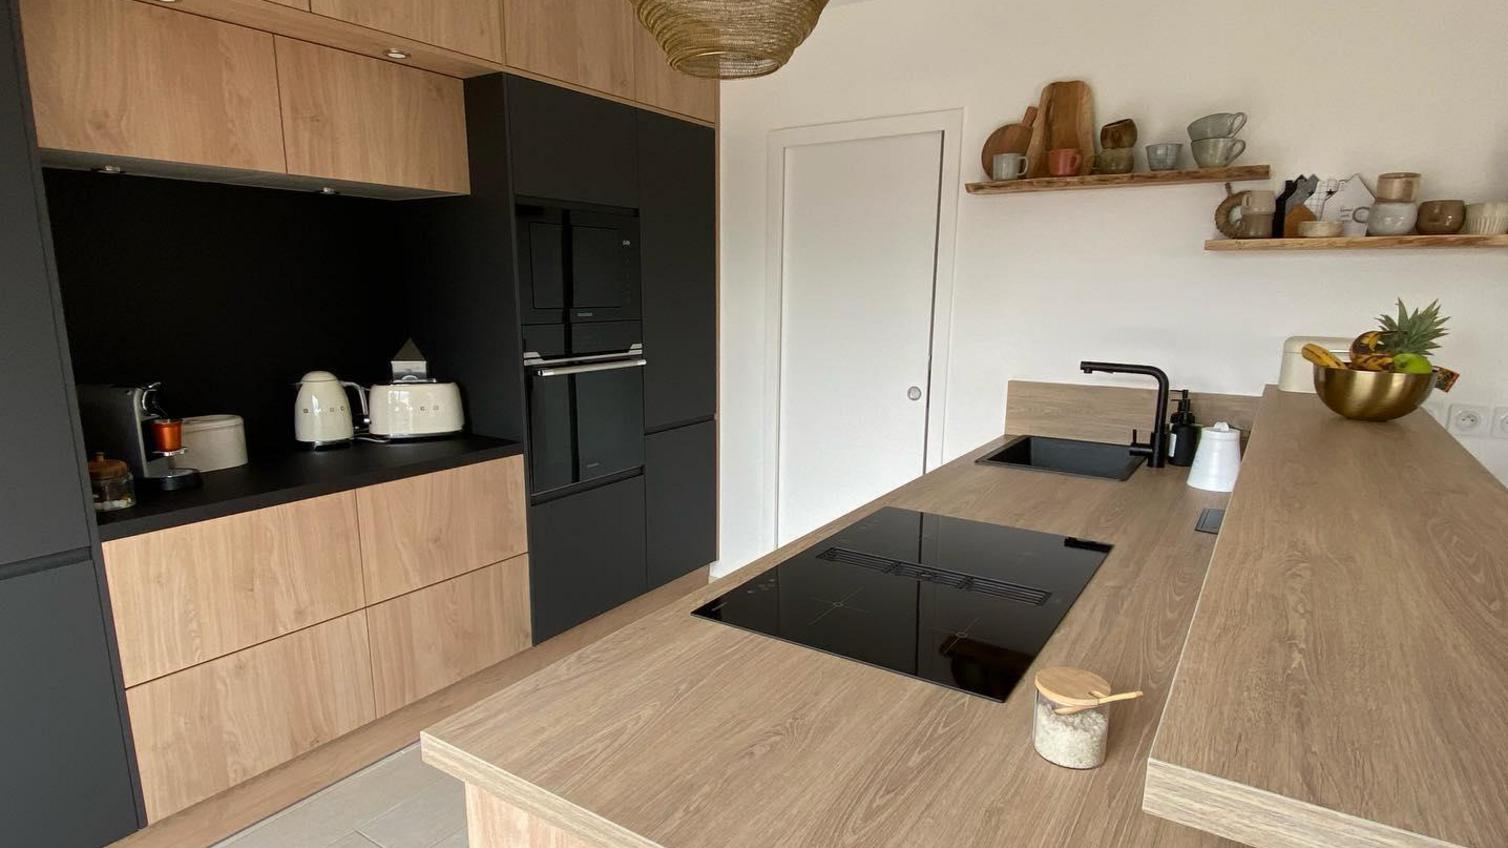 Black and oak kitchen design with slab doors, a light oak kitchen island with an induction hob, black sink and tap, and oven.